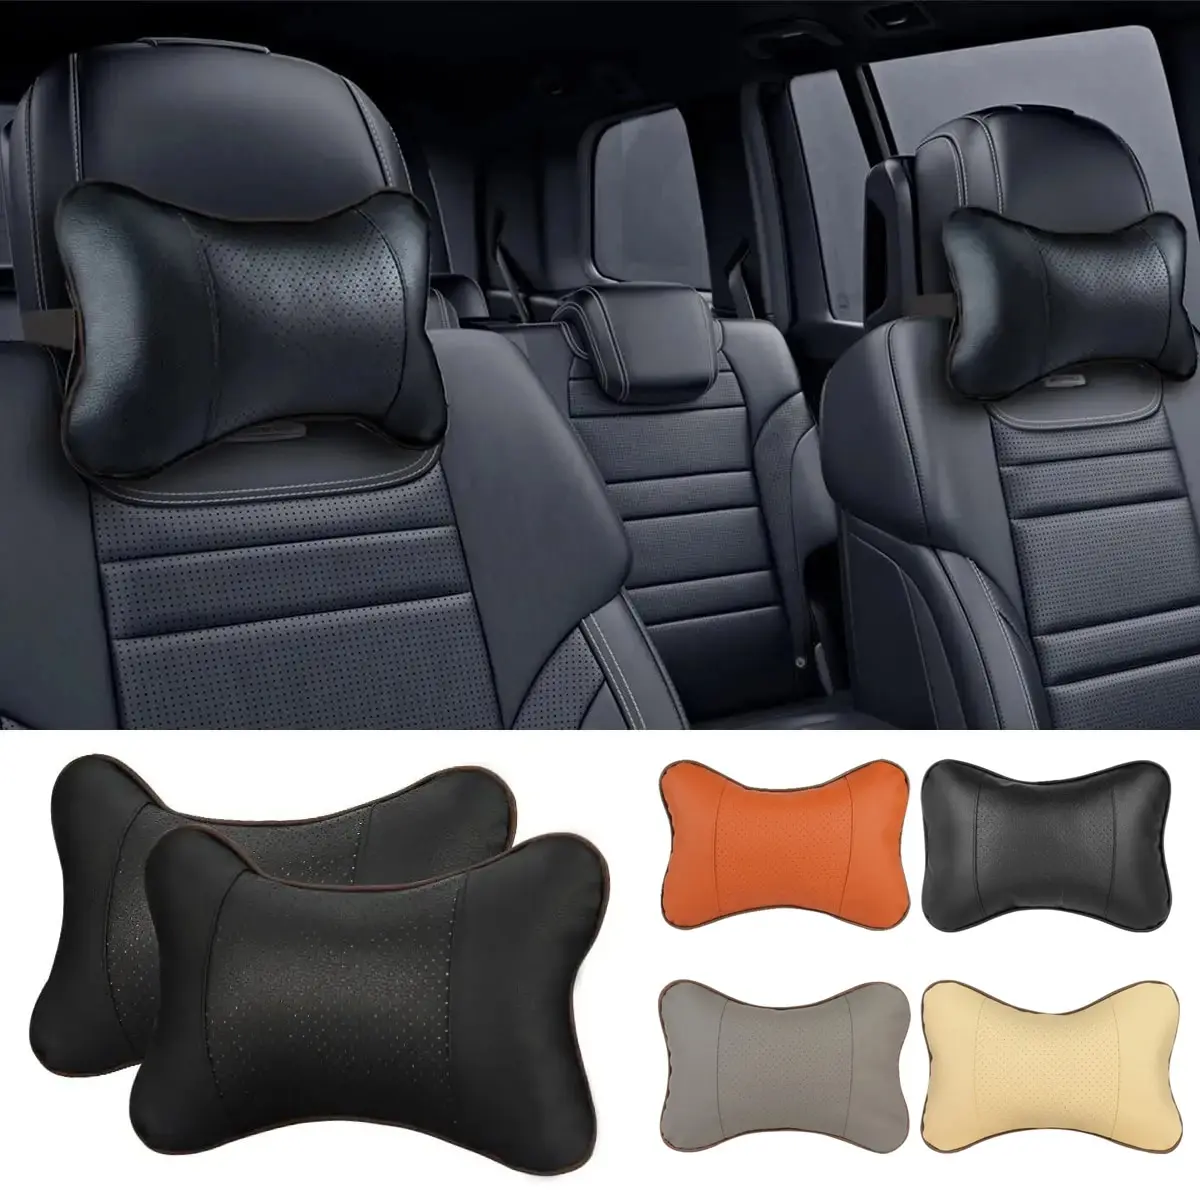 Car Neck Pillows Both Side Pu Leather 1pcs Pack Headrest For Head Pain Relief Filled Fiber Universal Car Pillow-animated-img